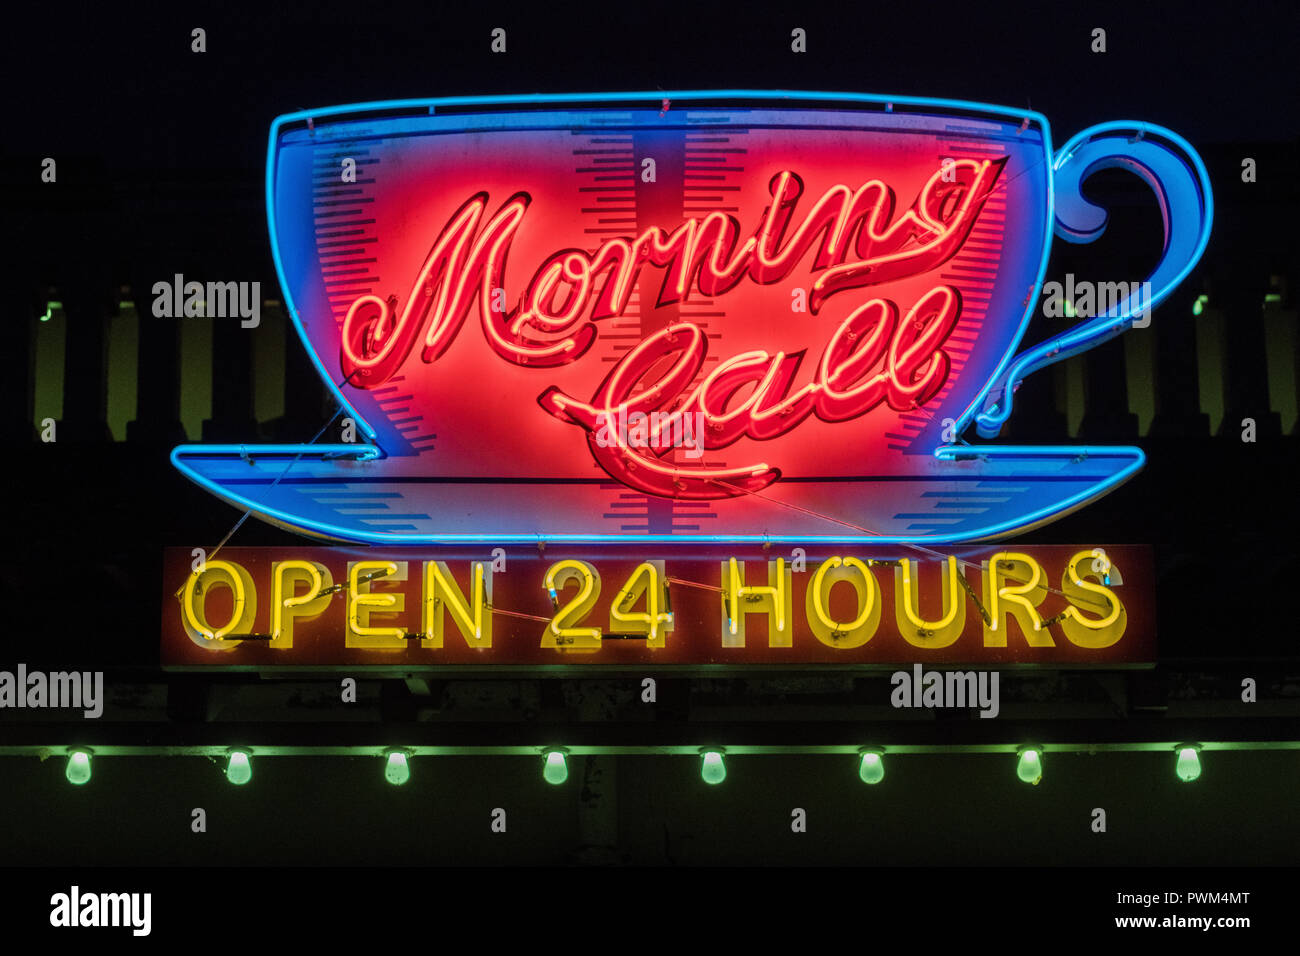 Neon sign for Morning Call cafe Stock Photo